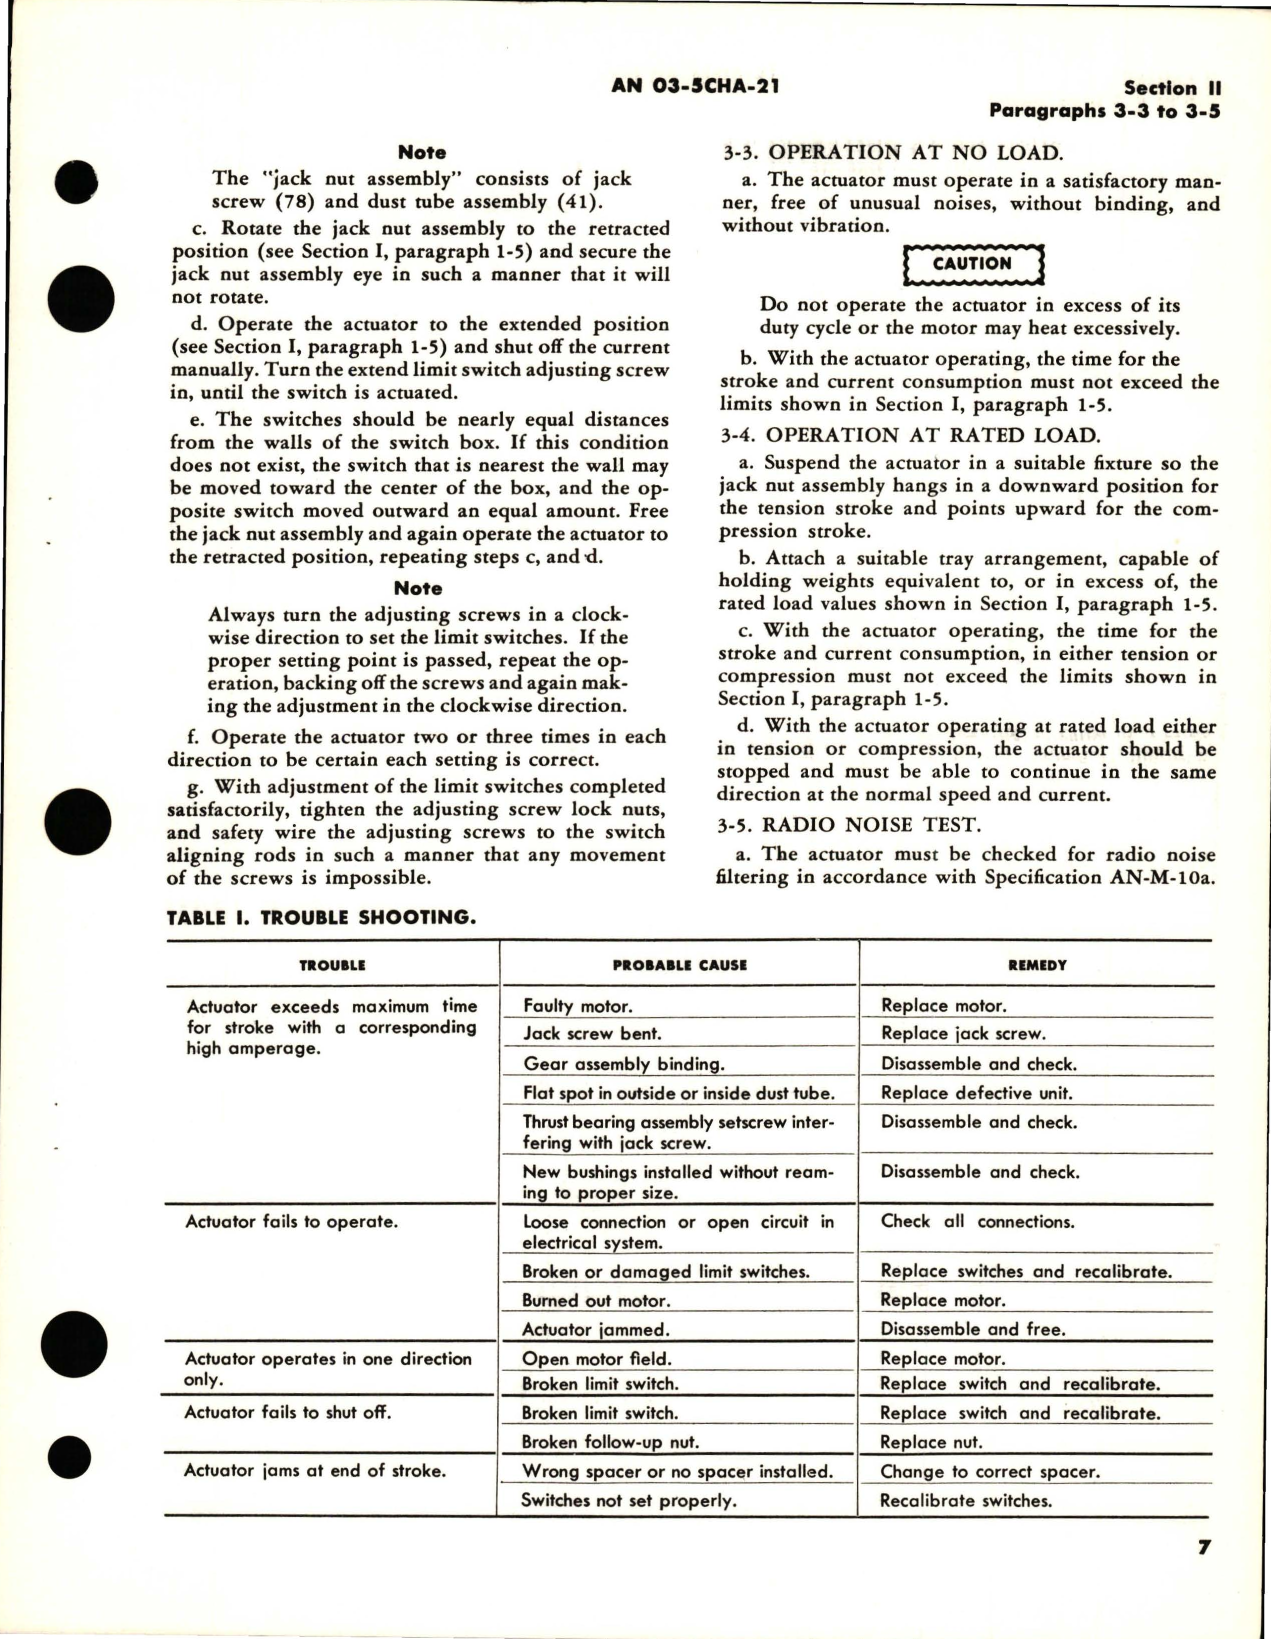 Sample page 9 from AirCorps Library document: Overhaul Instructions for Electro-Mechanical Linear Actuators - Parts 30582 and 31534